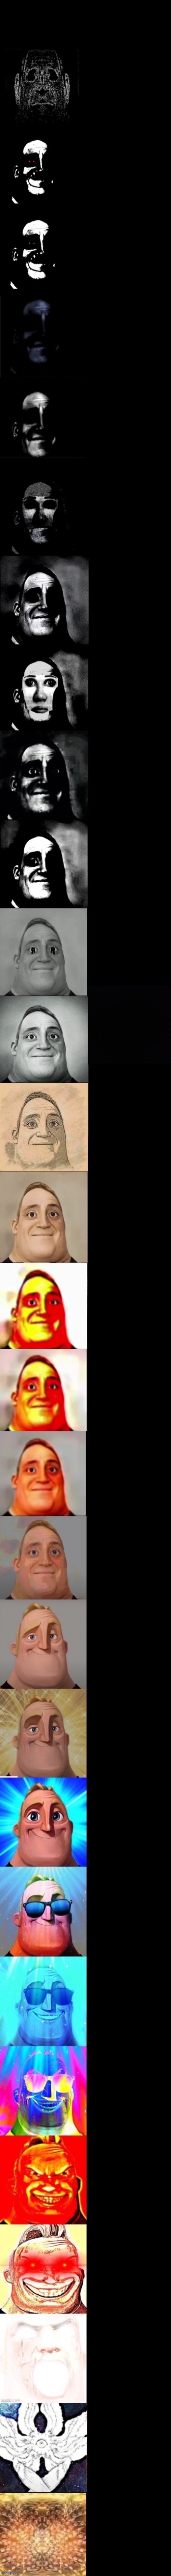 Mr Incredible Becoming Uncanny To Canny But It's Decent | image tagged in mr incredible becoming uncanny to canny but it's decent | made w/ Imgflip meme maker